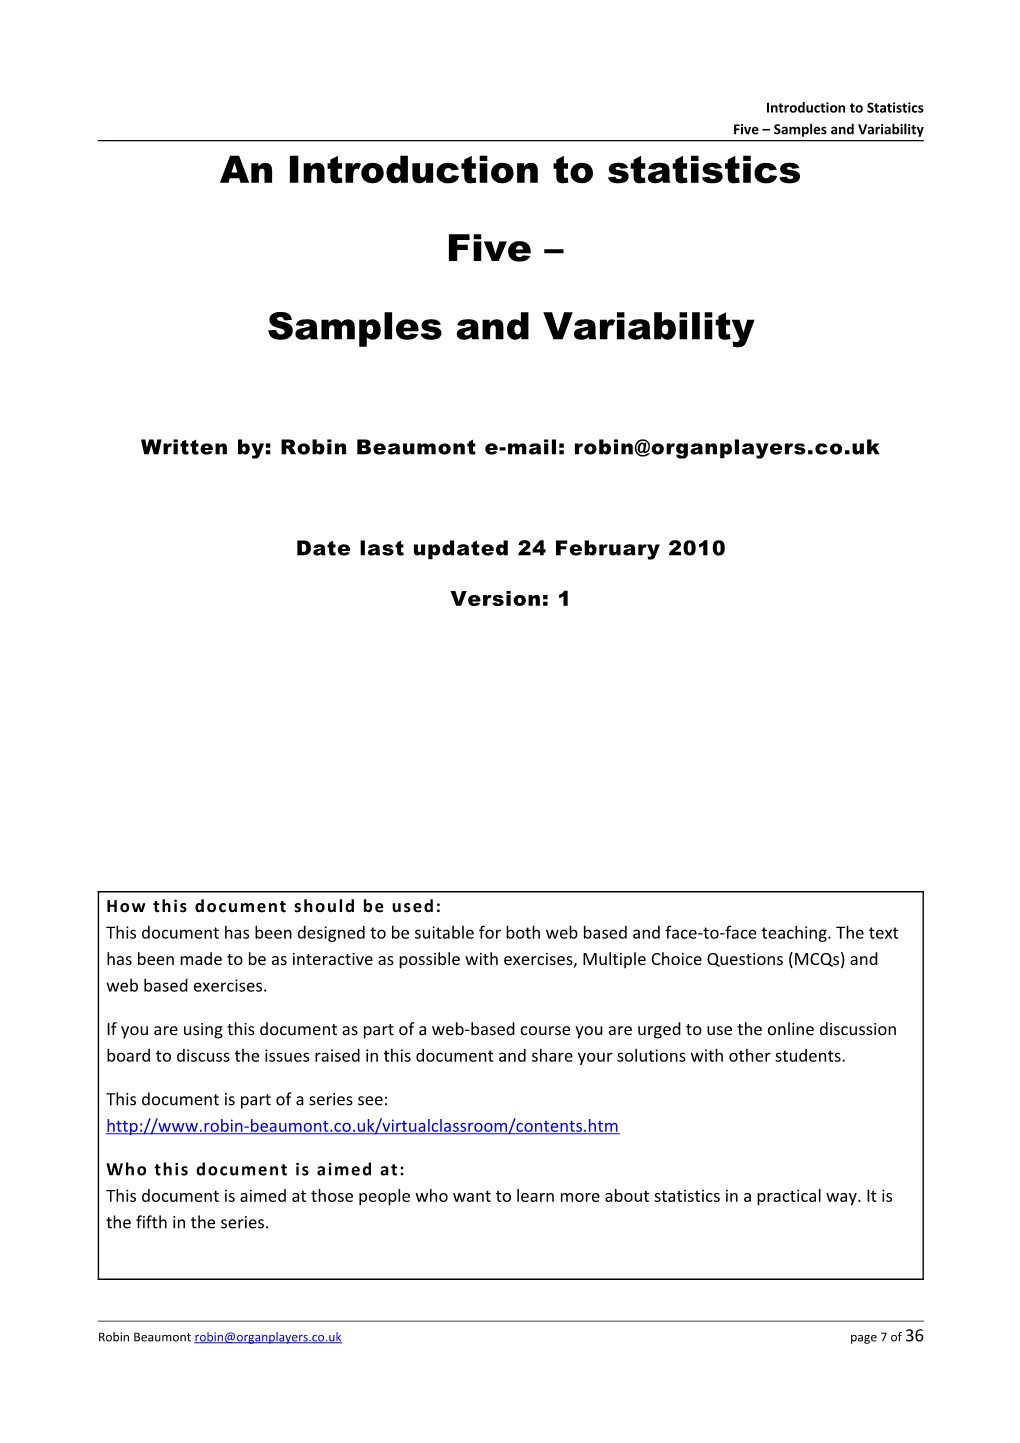 Introduction to Statistics Five Samples and Variability